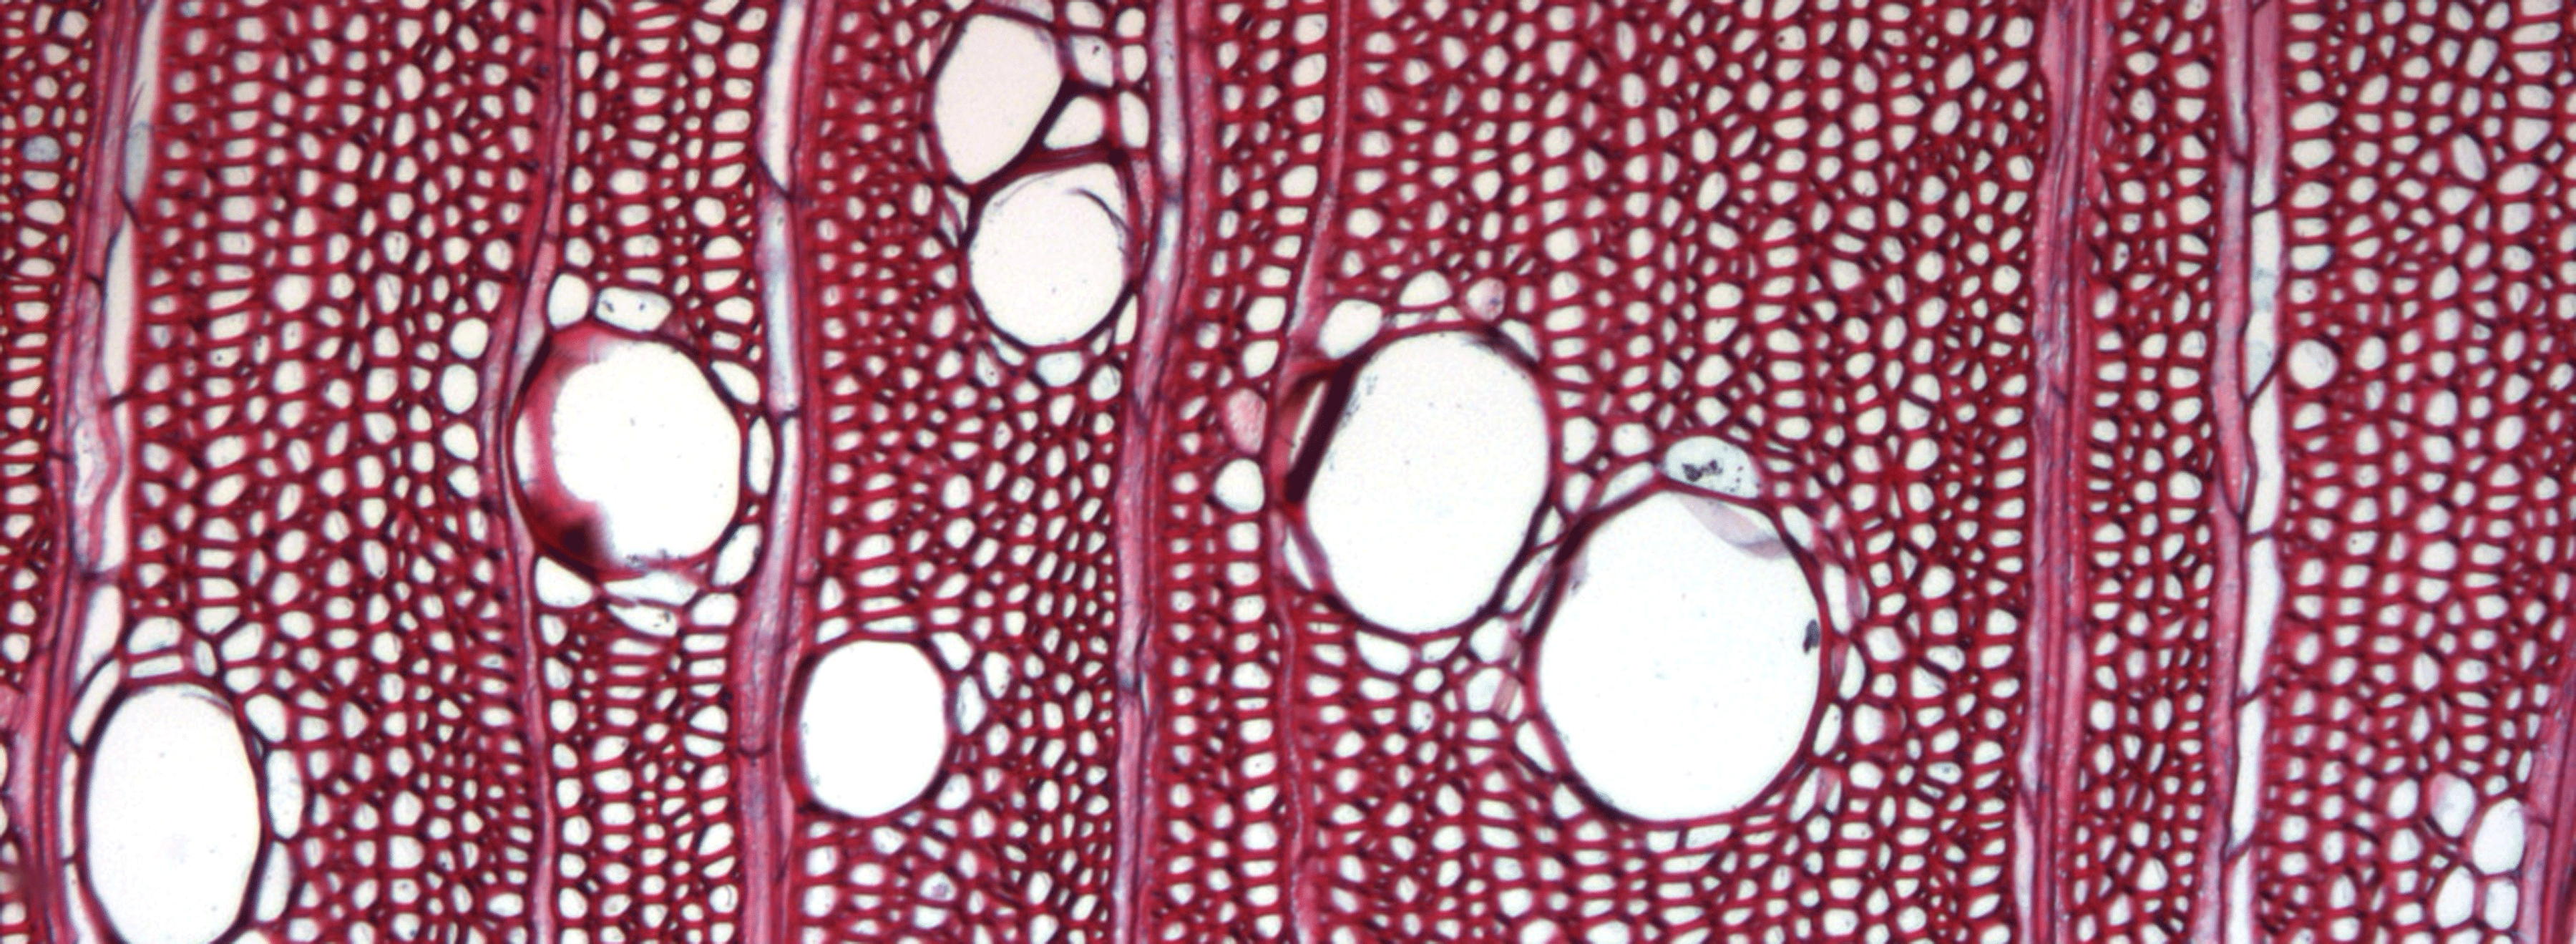 A microscopic  scan of Turraeanthus africana wood 